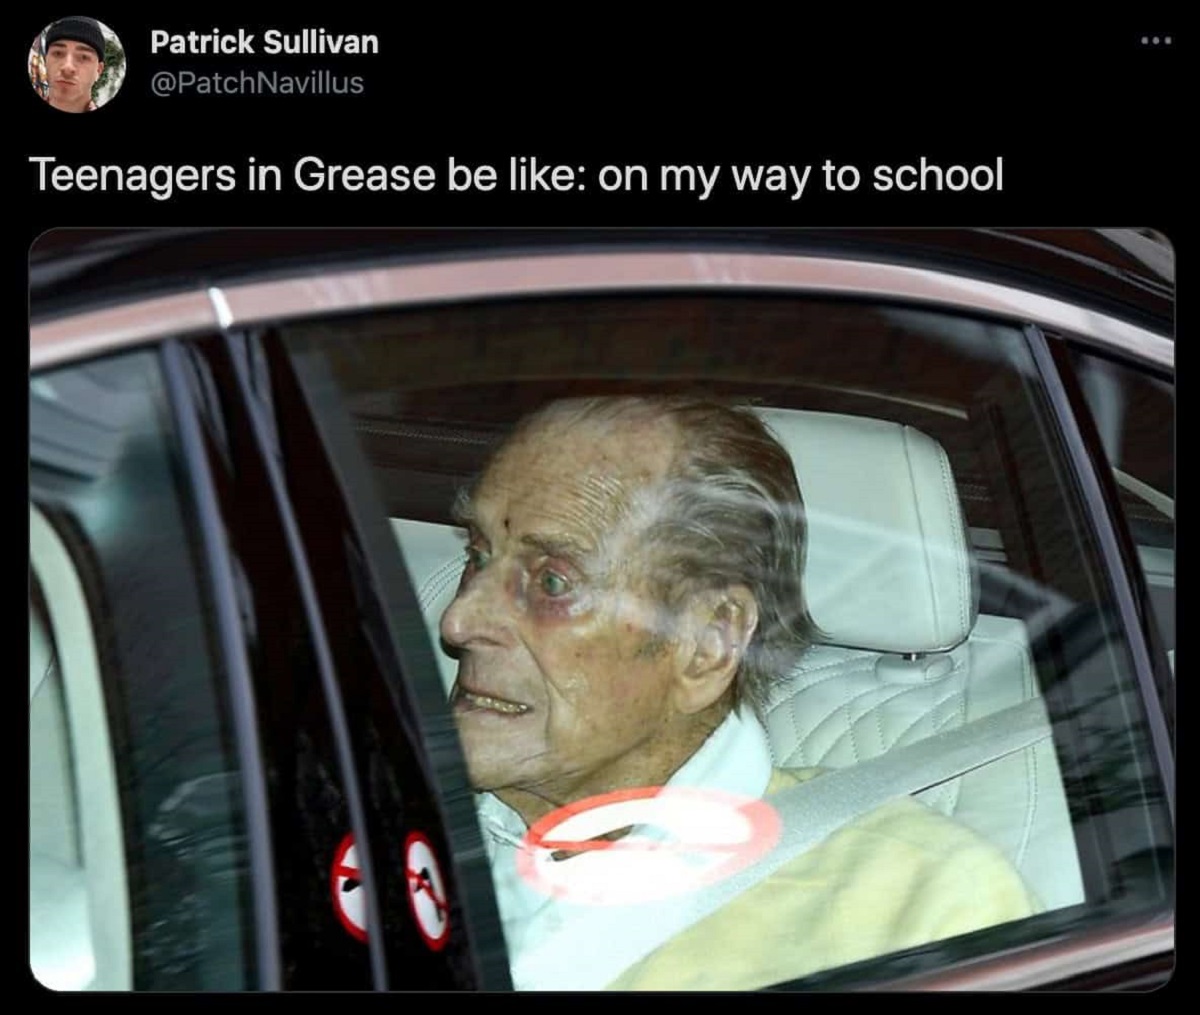 prince philip last - Patrick Sullivan Teenagers in Grease be on my way to school